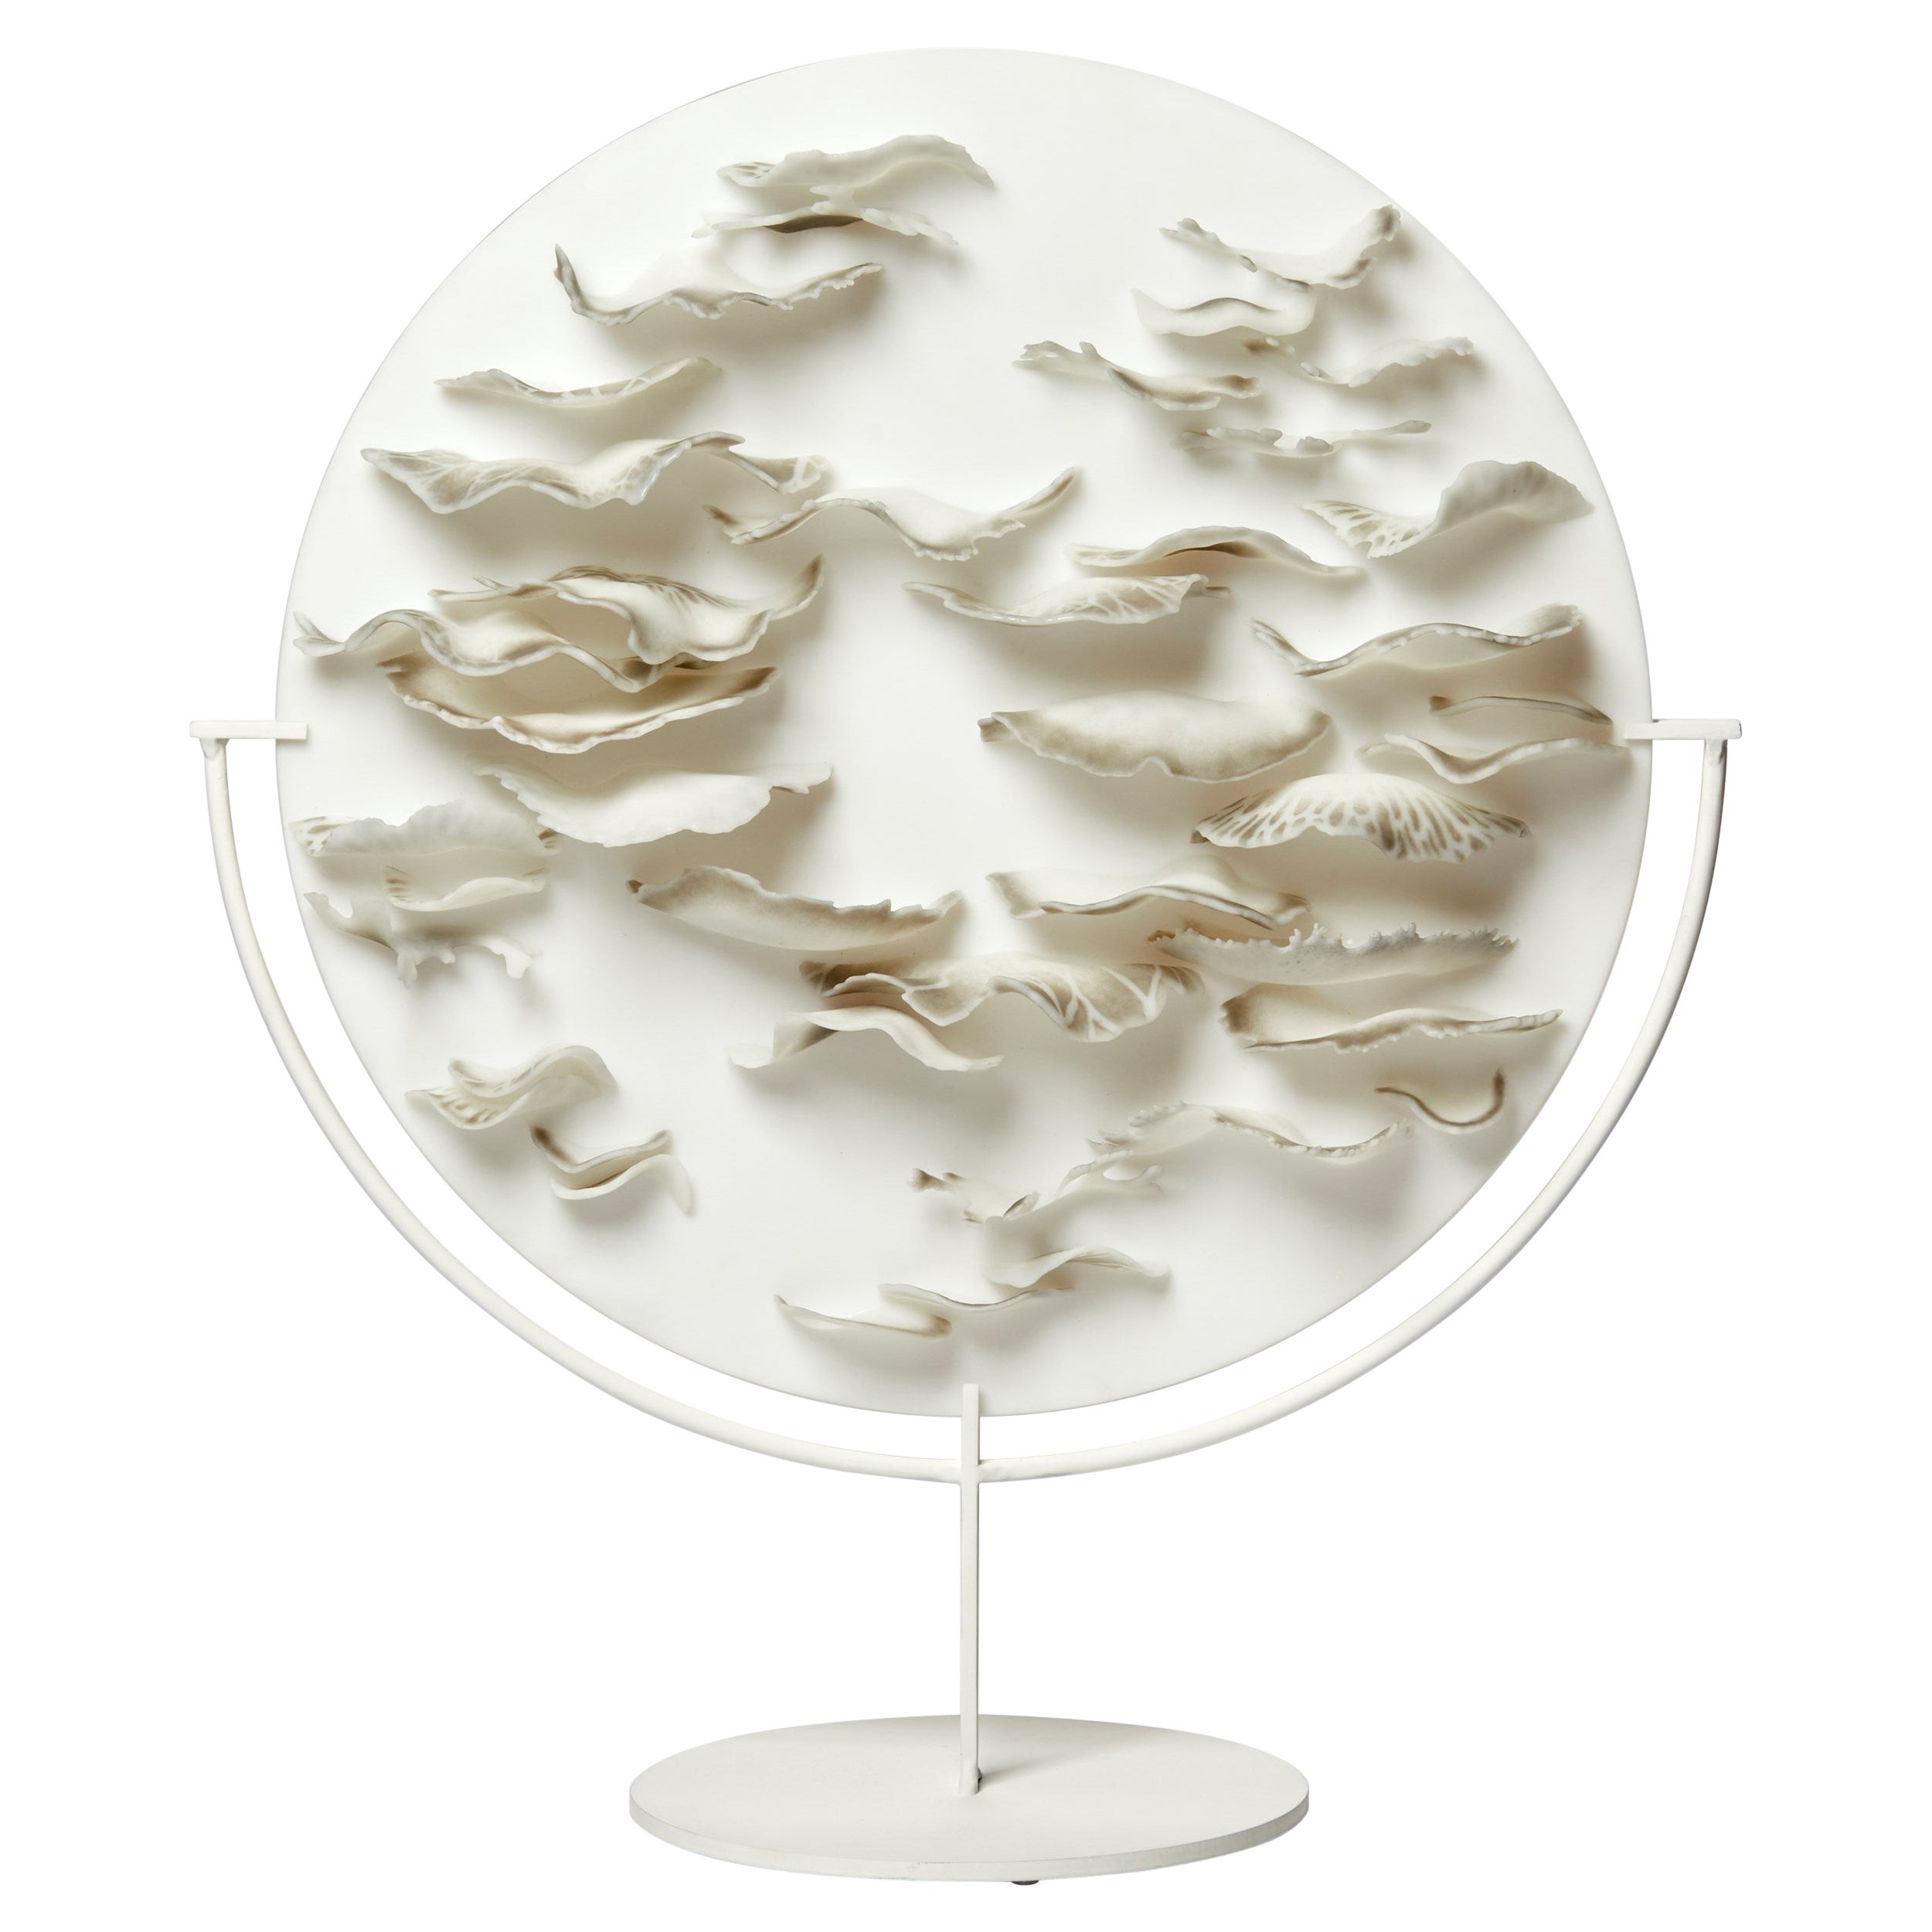 Bracket Mushrooms in Grey and White, a Glass Sculptural Plate by Verity Pulford